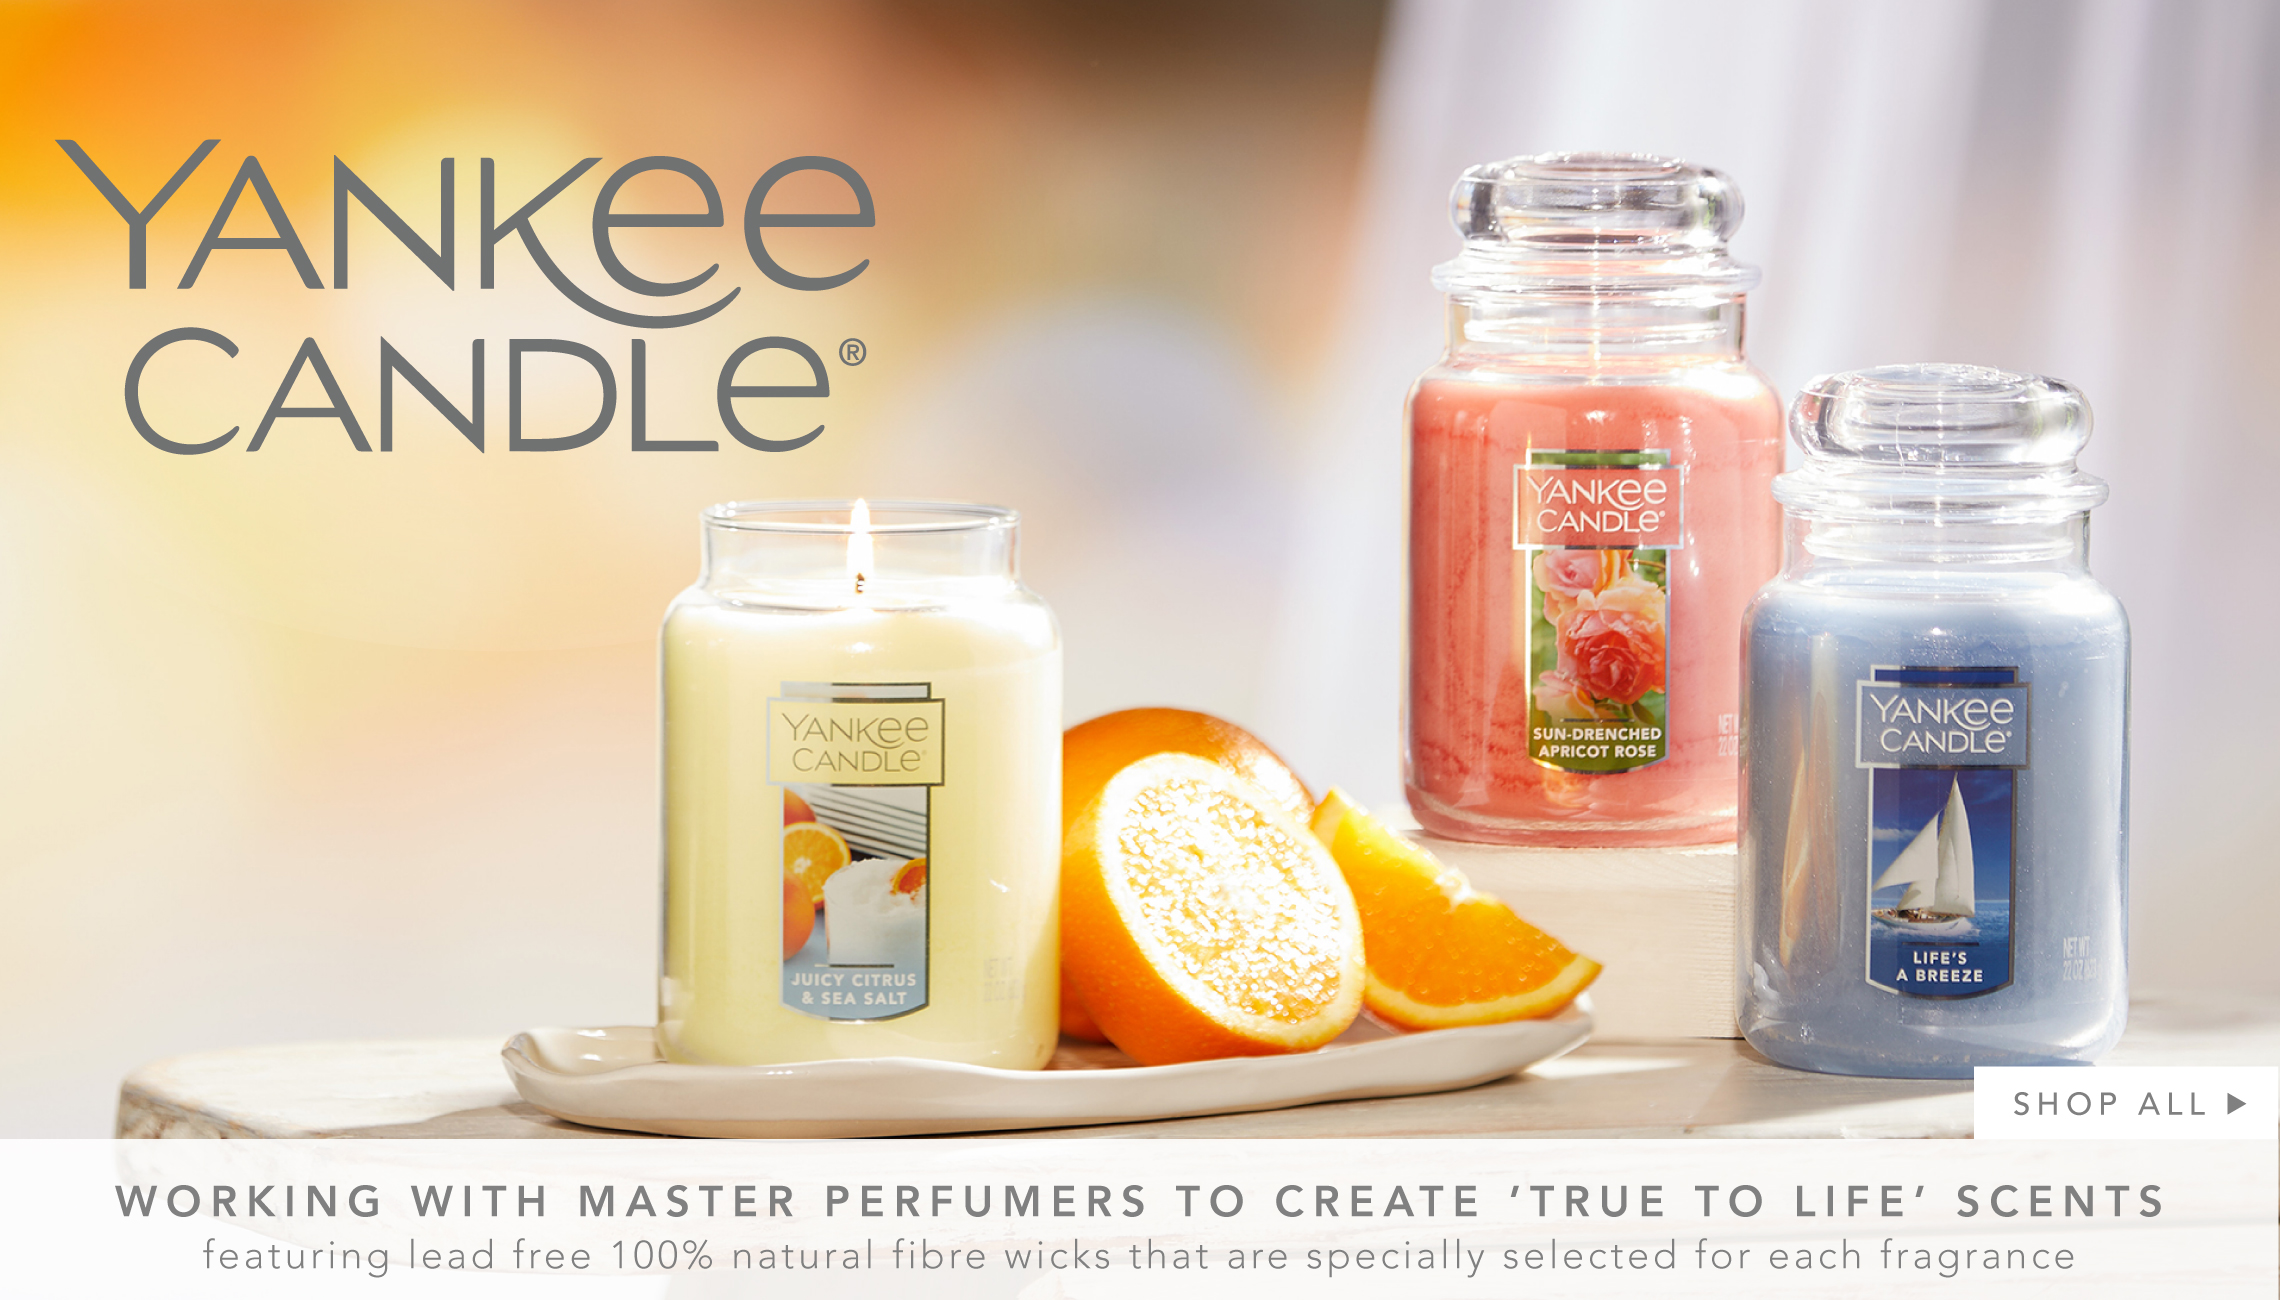 Working with master perfumers to create true to life scents